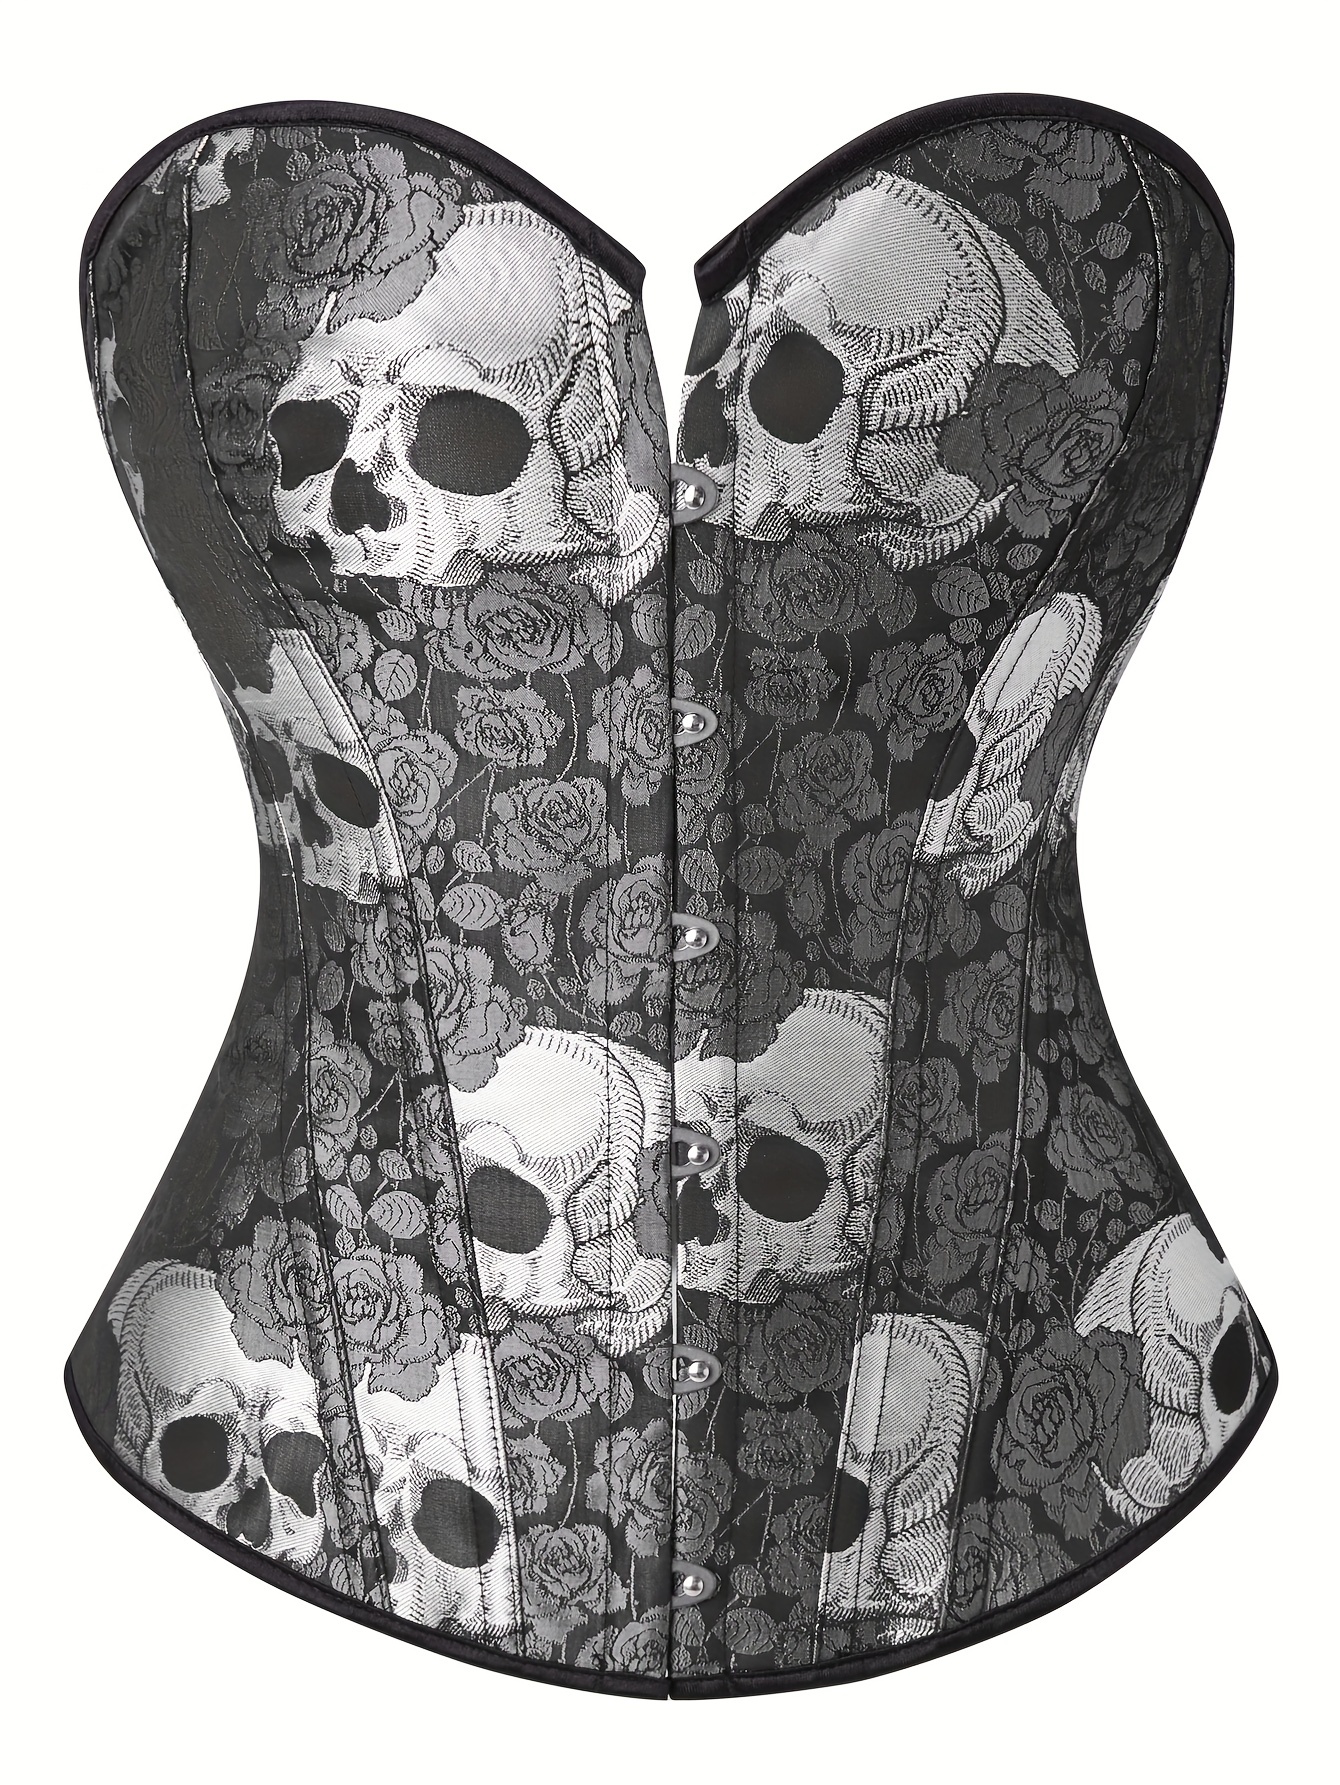 Plus Size Gothic Corset, Women's Plus Rose & Skull Patterned Boned Lace Up  Waist Training Body Shaper Top for Music Festival